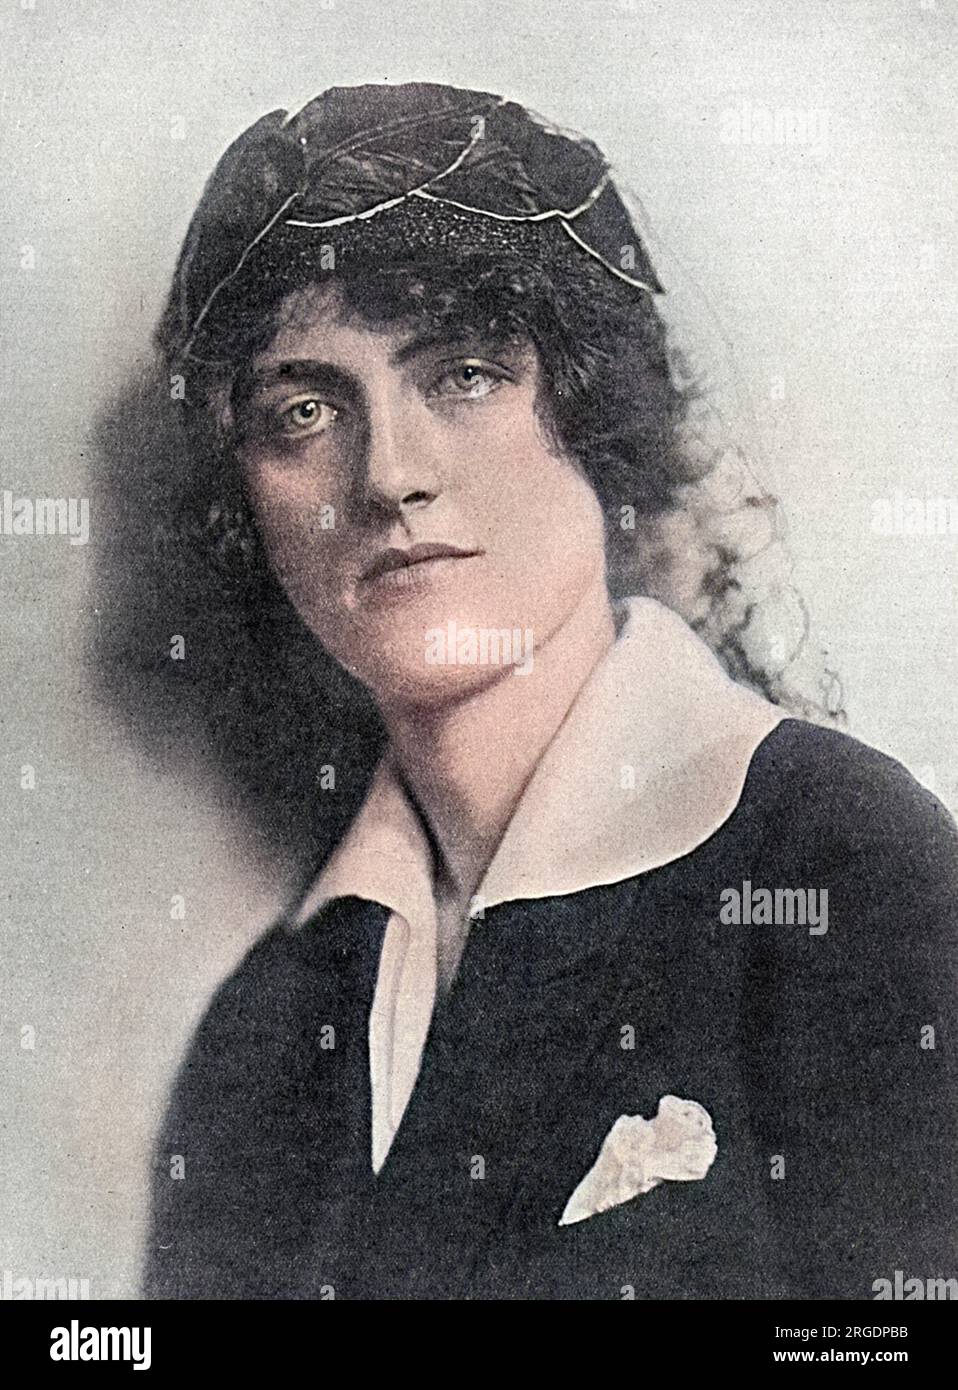 Lady Catherine (Kitty) Petre, formerly Catherine Margaret Boscawen, wife of Lionel Goerge Carroll, 16th Baron Petre. The 16th Baron, son of the 15th Baron and Julia Mary Cavendish-Taylor. He was born 3rd November 1890 and became a Captain in the Coldstream Guards. He was wounded near Arras in the late Spring of 1915, was repatriated and died of his wounds in September leaving two children, one born posthumously. Lady Petre subsequently remarried and became Lady Rasch. She was responsible for the restoration of the Petre family seat, Ingatestone Hall, in Essex. Stock Photo